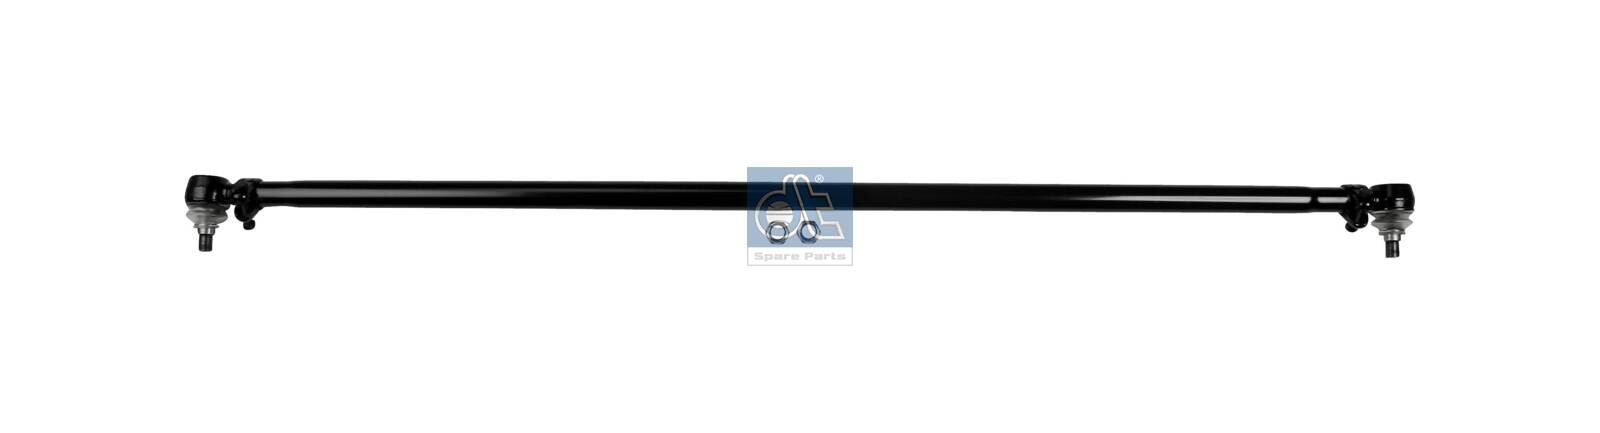 DT Spare Parts 4.64591 Rod Assembly 970 330 04 03